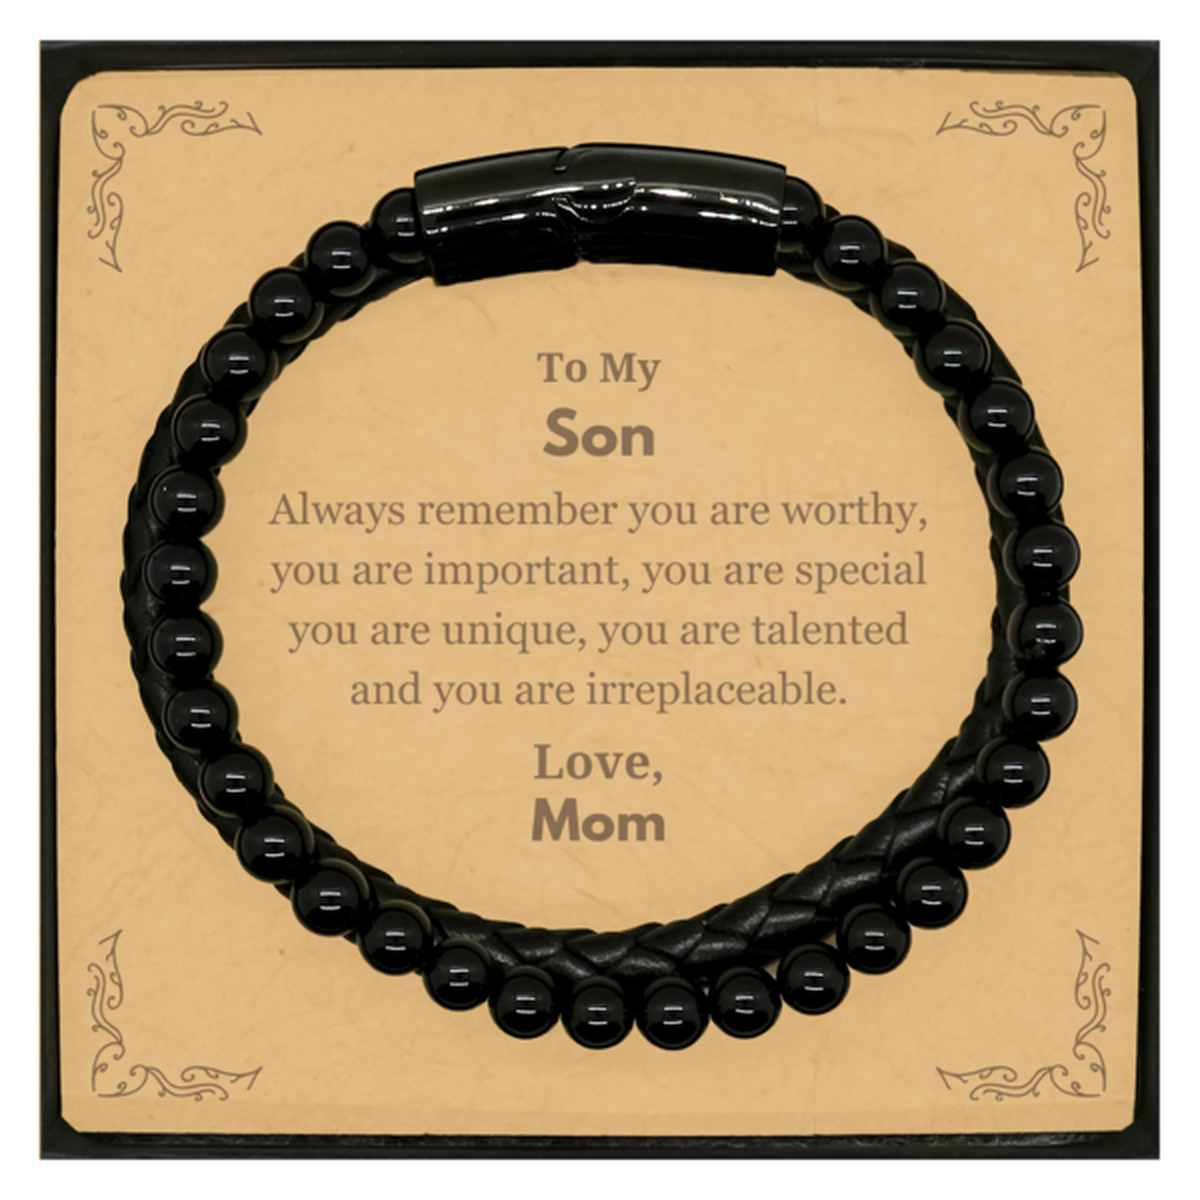 Son Birthday Gifts from Mom, Inspirational Stone Leather Bracelets for Son Christmas Graduation Gifts for Son Always remember you are worthy, you are important. Love, Mom